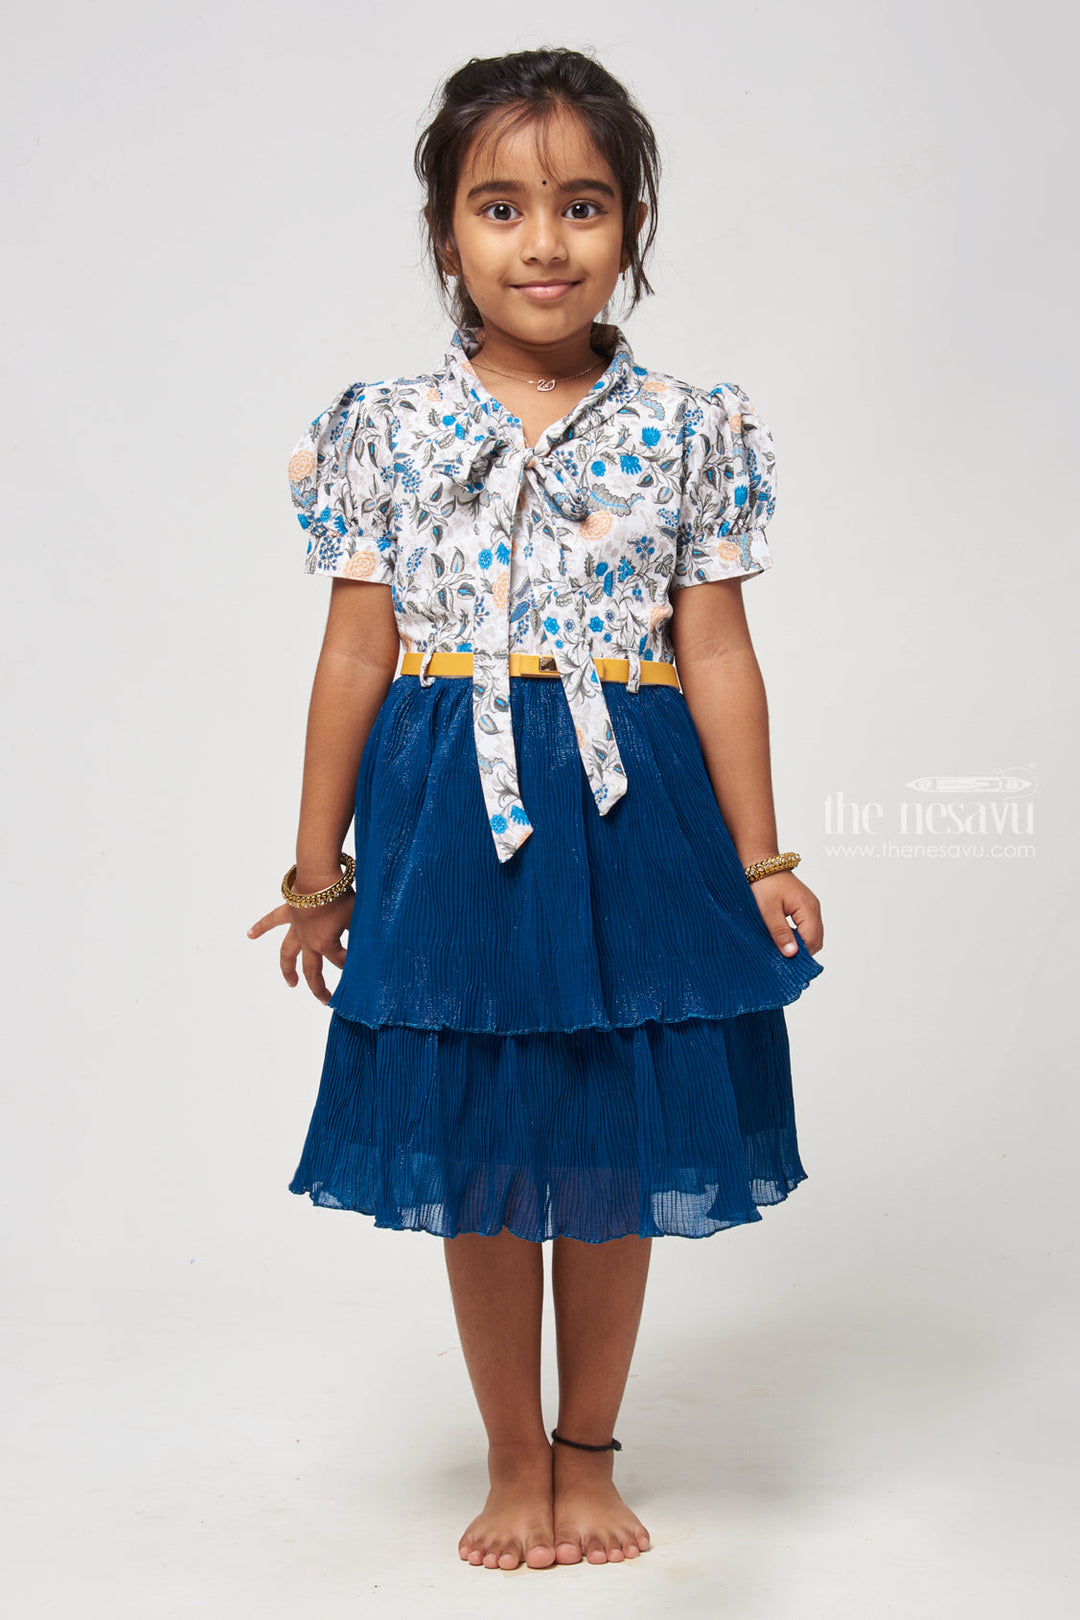 The Nesavu Frocks & Dresses Double Layer Flared Blue Frock - Floral Tie Neck Design Nesavu 20 (3Y) / Blue GFC1104A-20 Floral Printed Fancy Frock | Latest Frocks for Girls | The Nesavu Elevate your childs wardrobe with our Floral Printed Tie Neck with Double Layer Flared Blue Frock. The floral print adds elegance, while the sleeveless design ensures comfort. The tie neck detail adds a stylish touch, and the double layer flared skirt creates a graceful look.